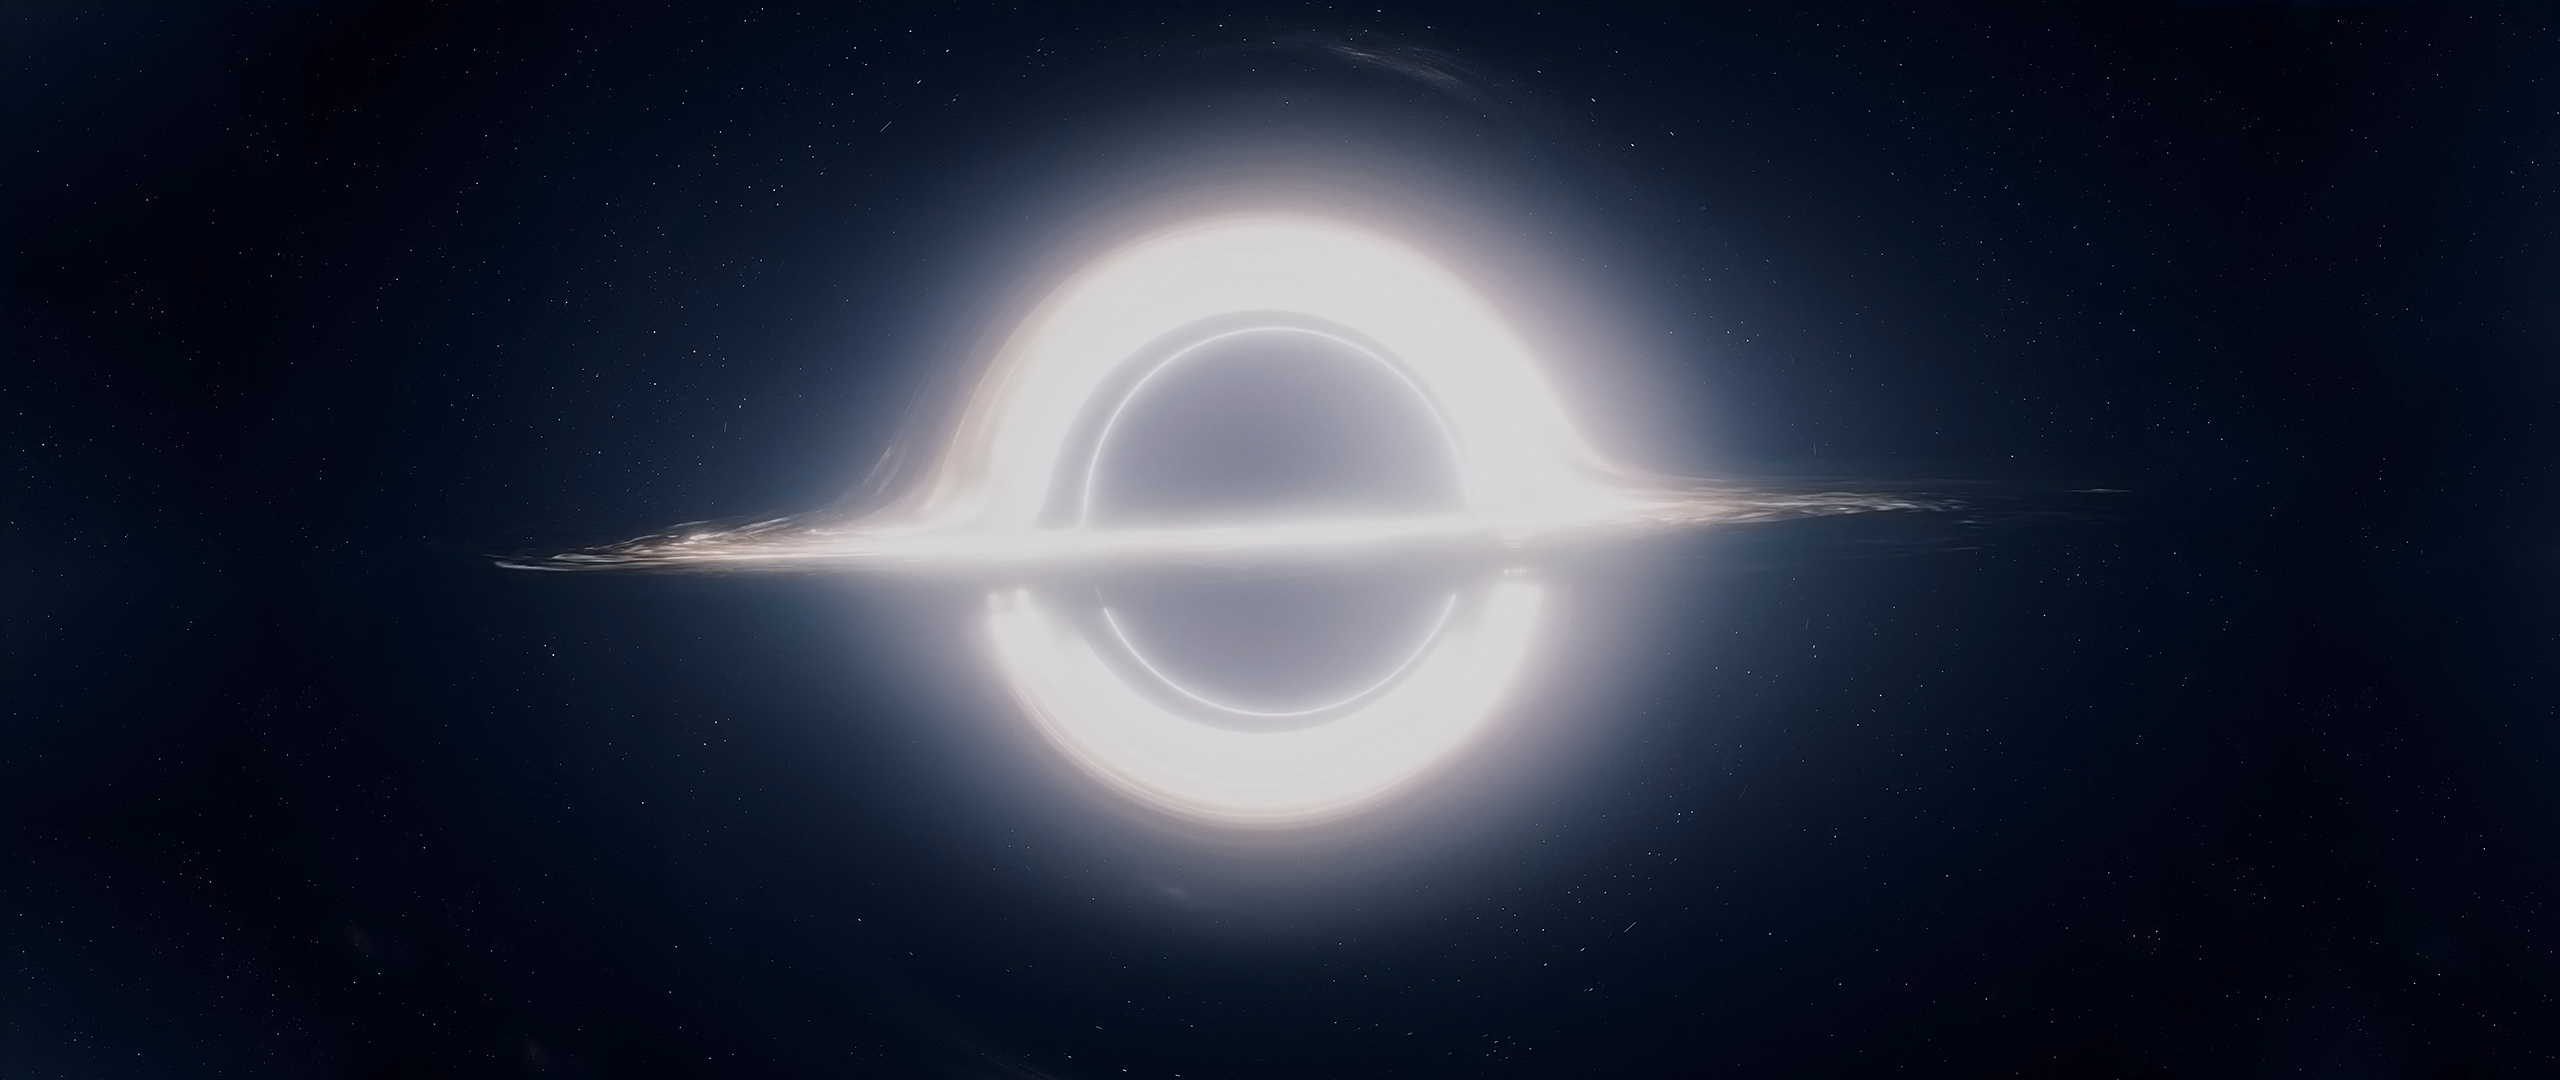 Black hole wallpapers